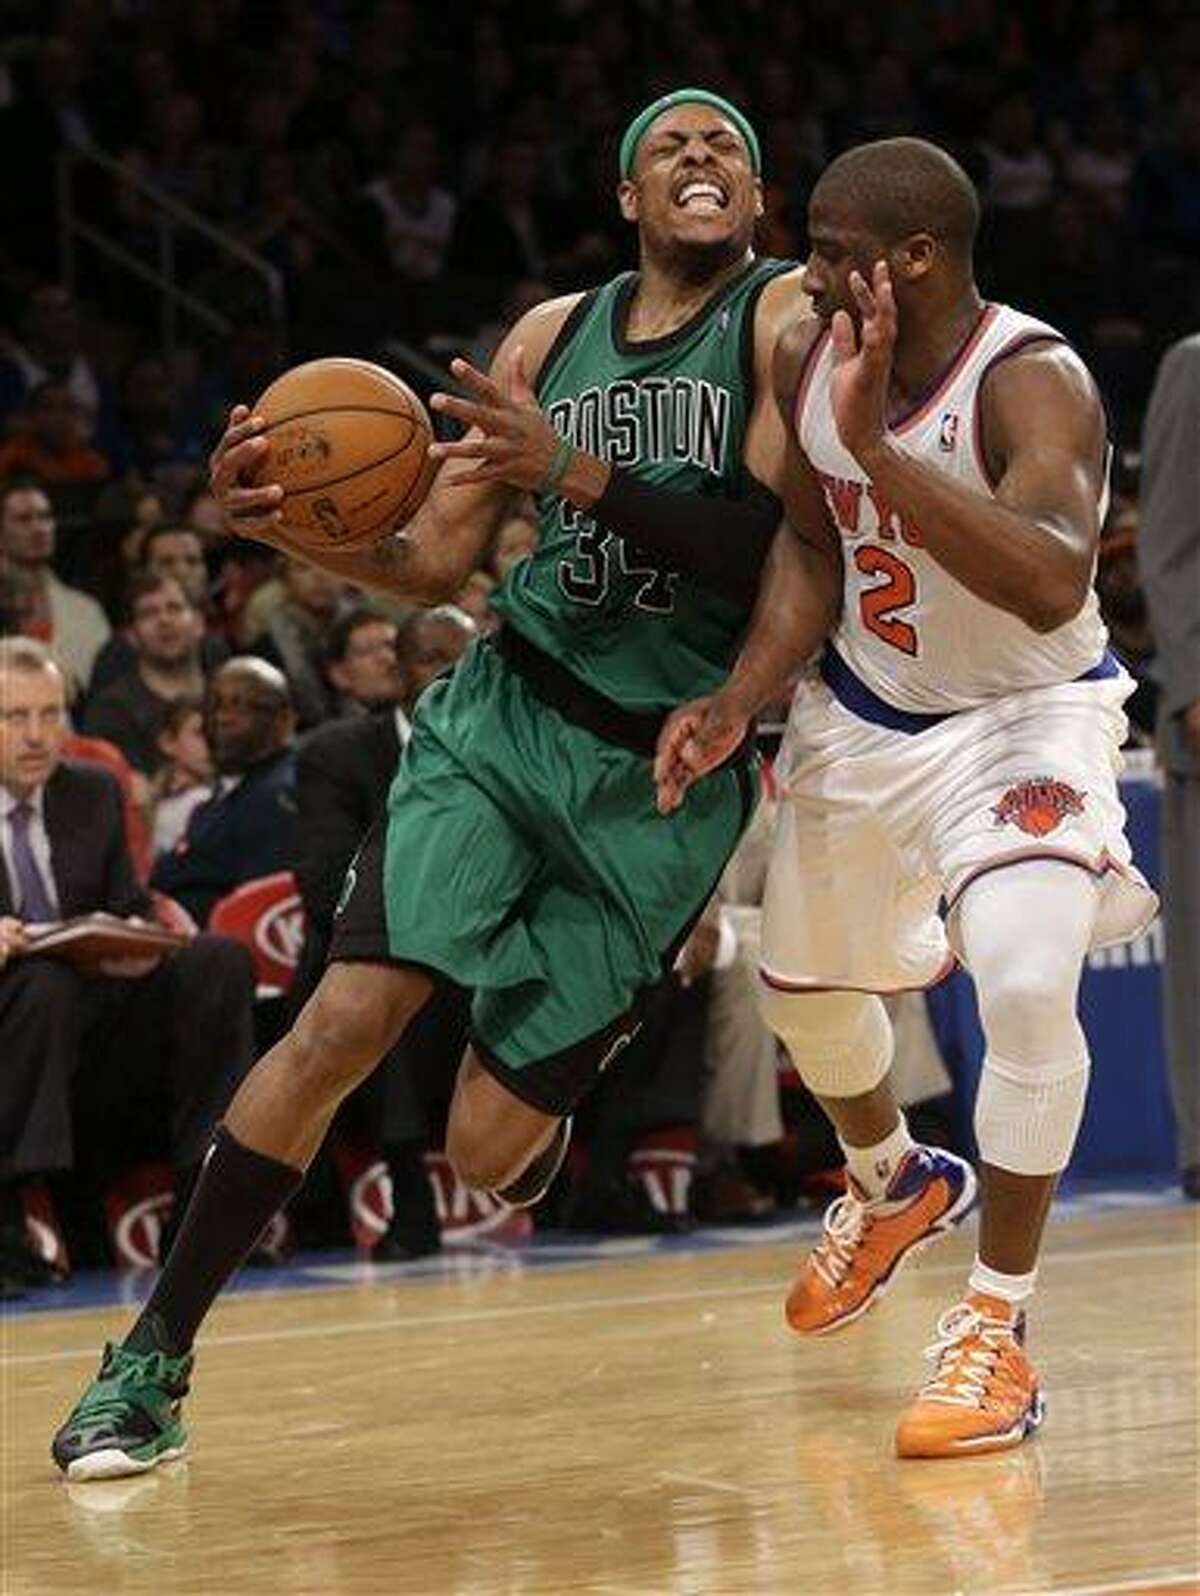 Boston Celtics' Paul Pierce, left, is fouled by New York Knicks' Raymond Felton during the second half of the NBA basketball game at Madison Square Garden Sunday, March 31, 2013 in New York. The Knicks beat the Celtics 108-89. (AP Photo/Seth Wenig)